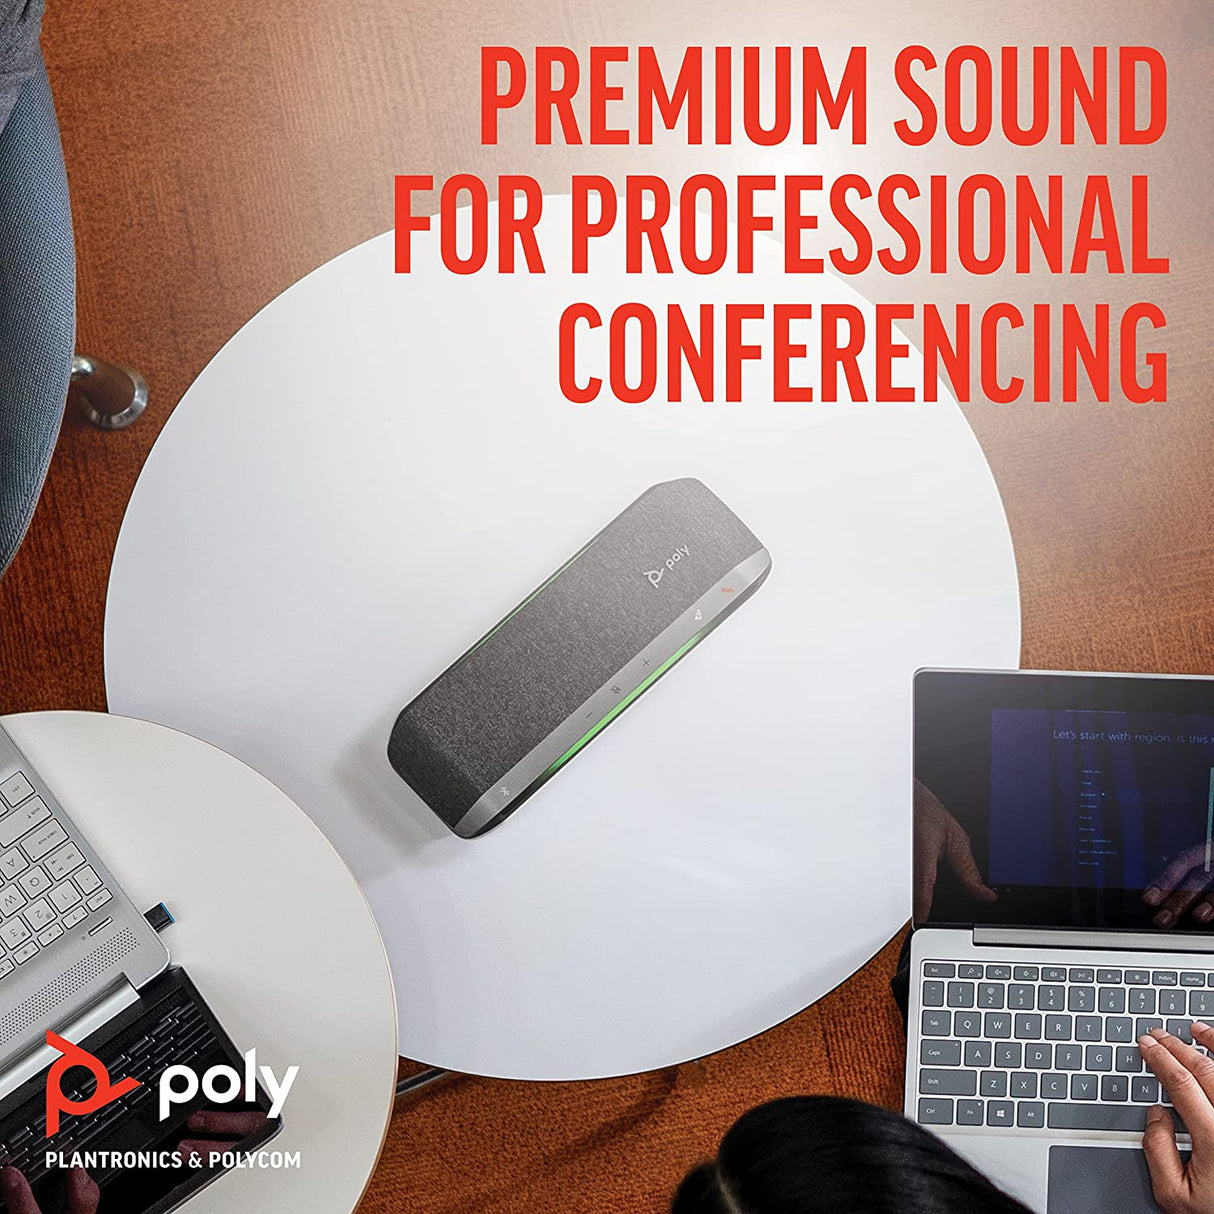 Poly - Sync 40 Smart -Speakerphone (Plantronics) - Flexible Work Spaces - Connect to PC/Mac via Combined USB-A/USB-C -Cable and Smartphones via -Bluetooth - Works with Teams, Zoom &amp; more Sync 40 Speakerphone Standard Speakerphone